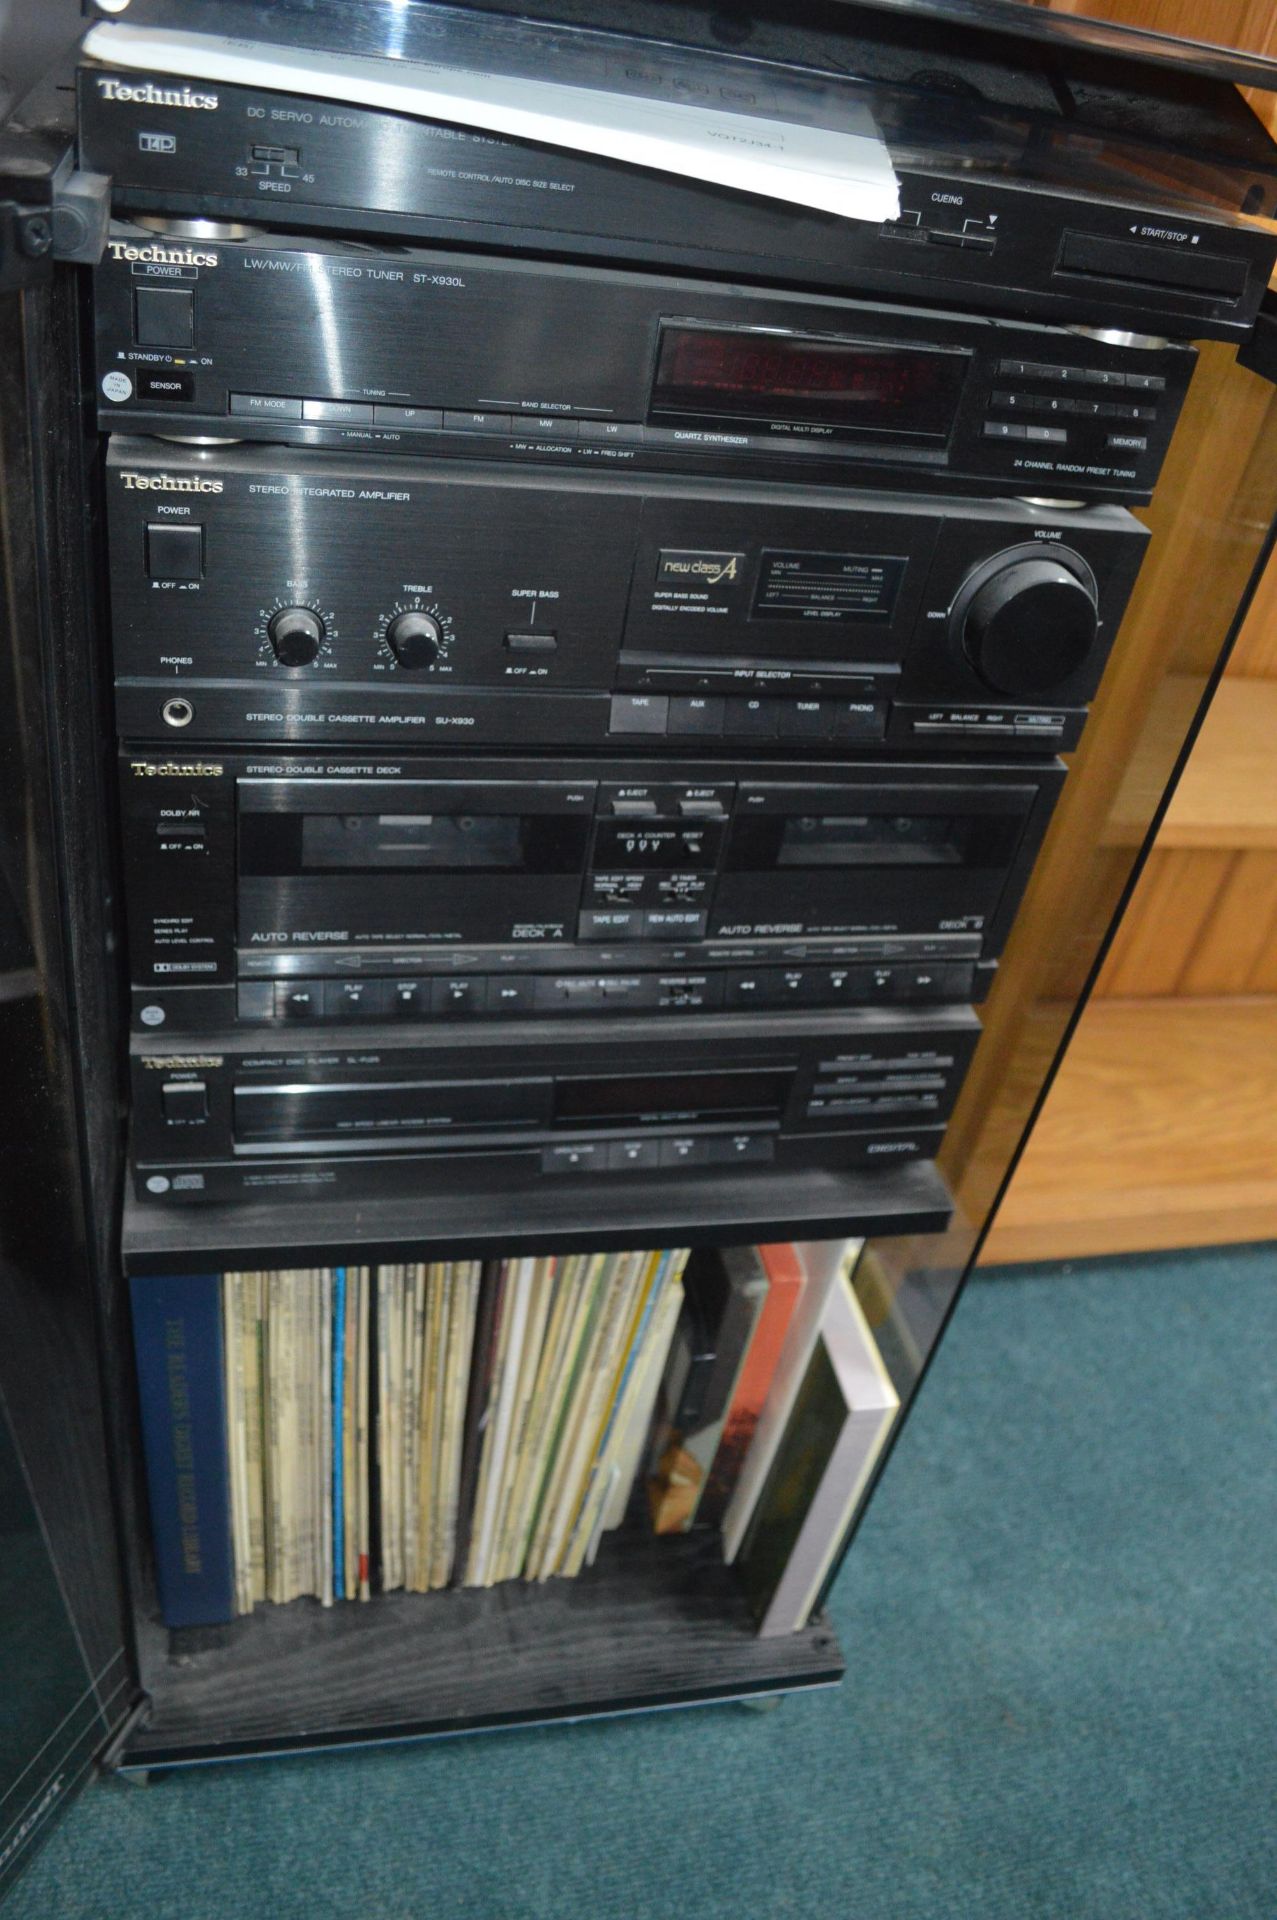 Technics Audio System with Cabinet and Record Coll - Image 2 of 3